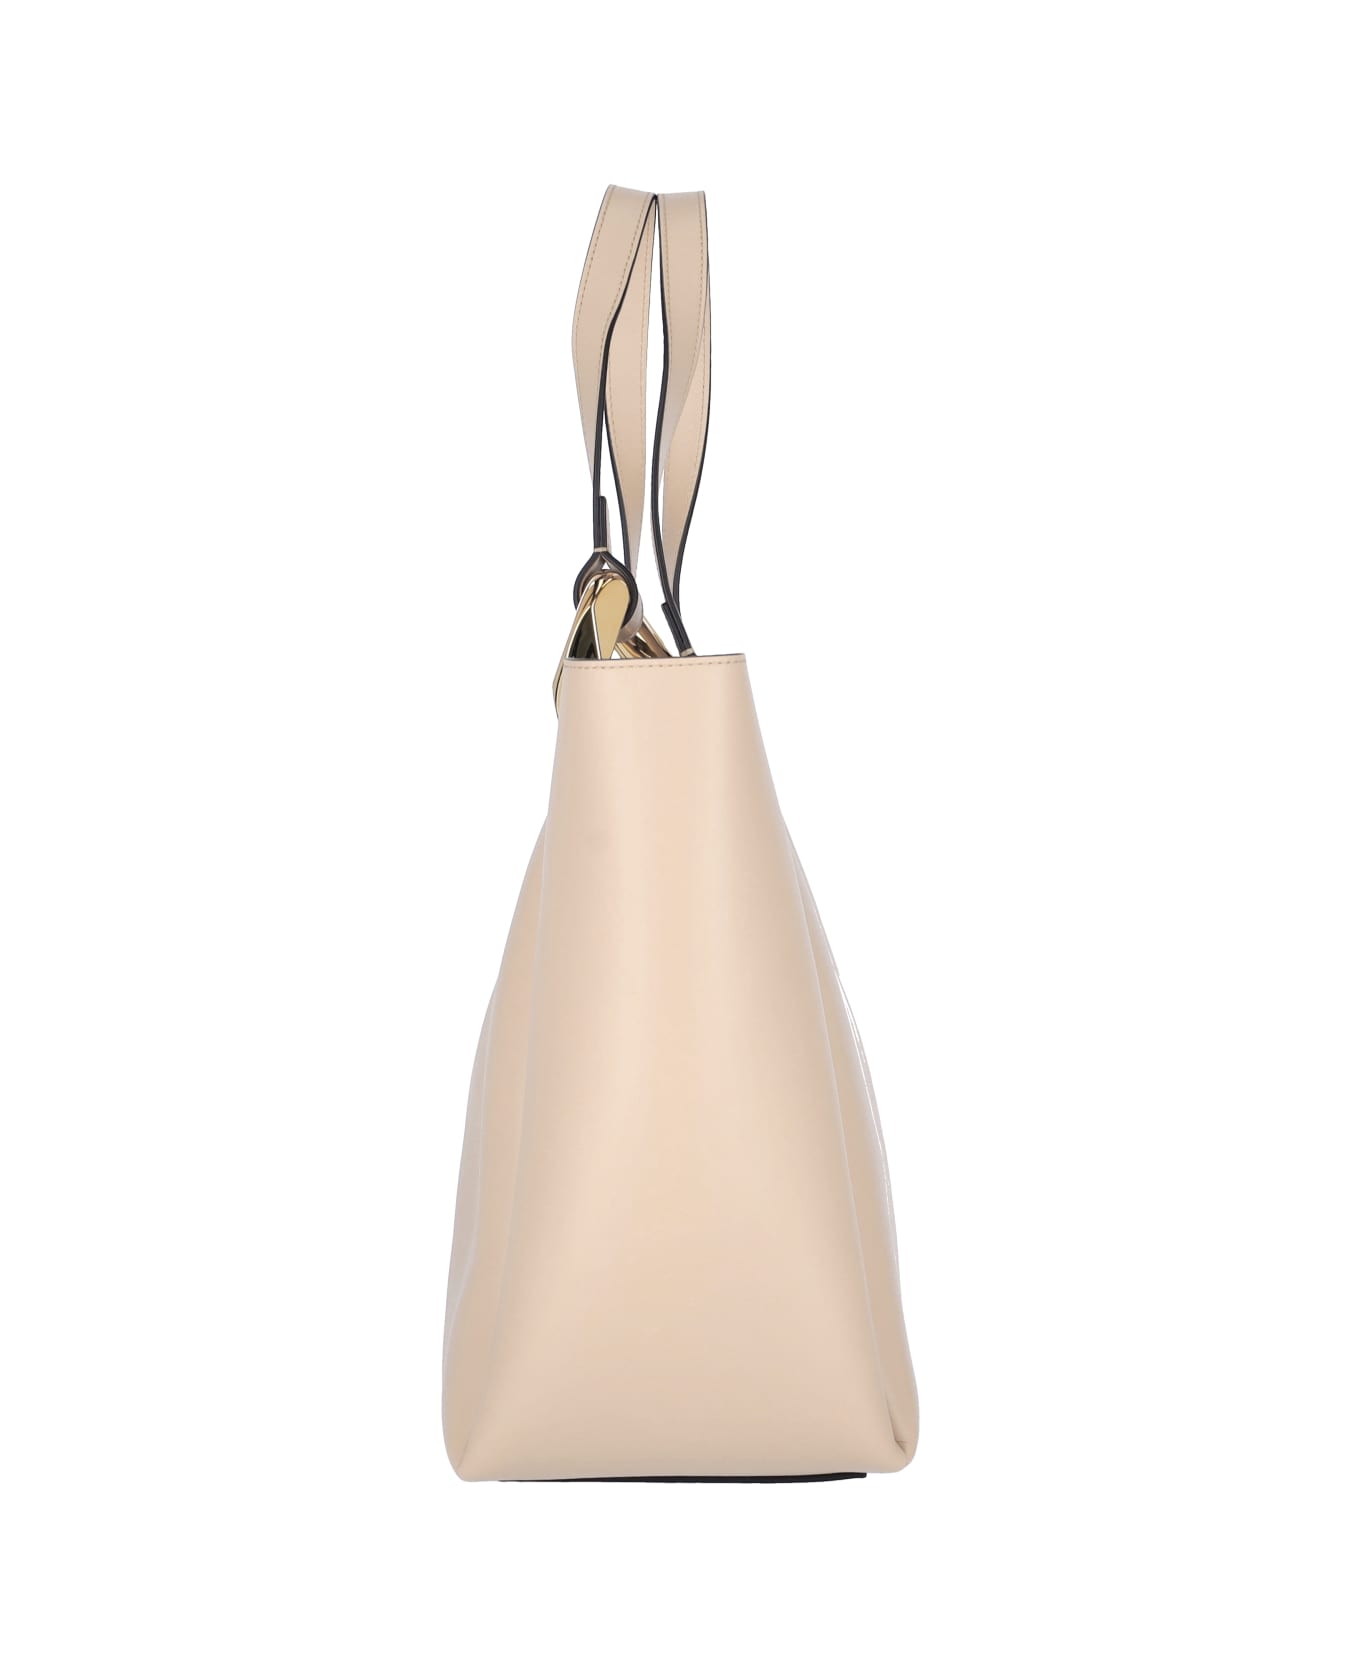 J.W. Anderson "chain Cabas" Tote Bag - Beige